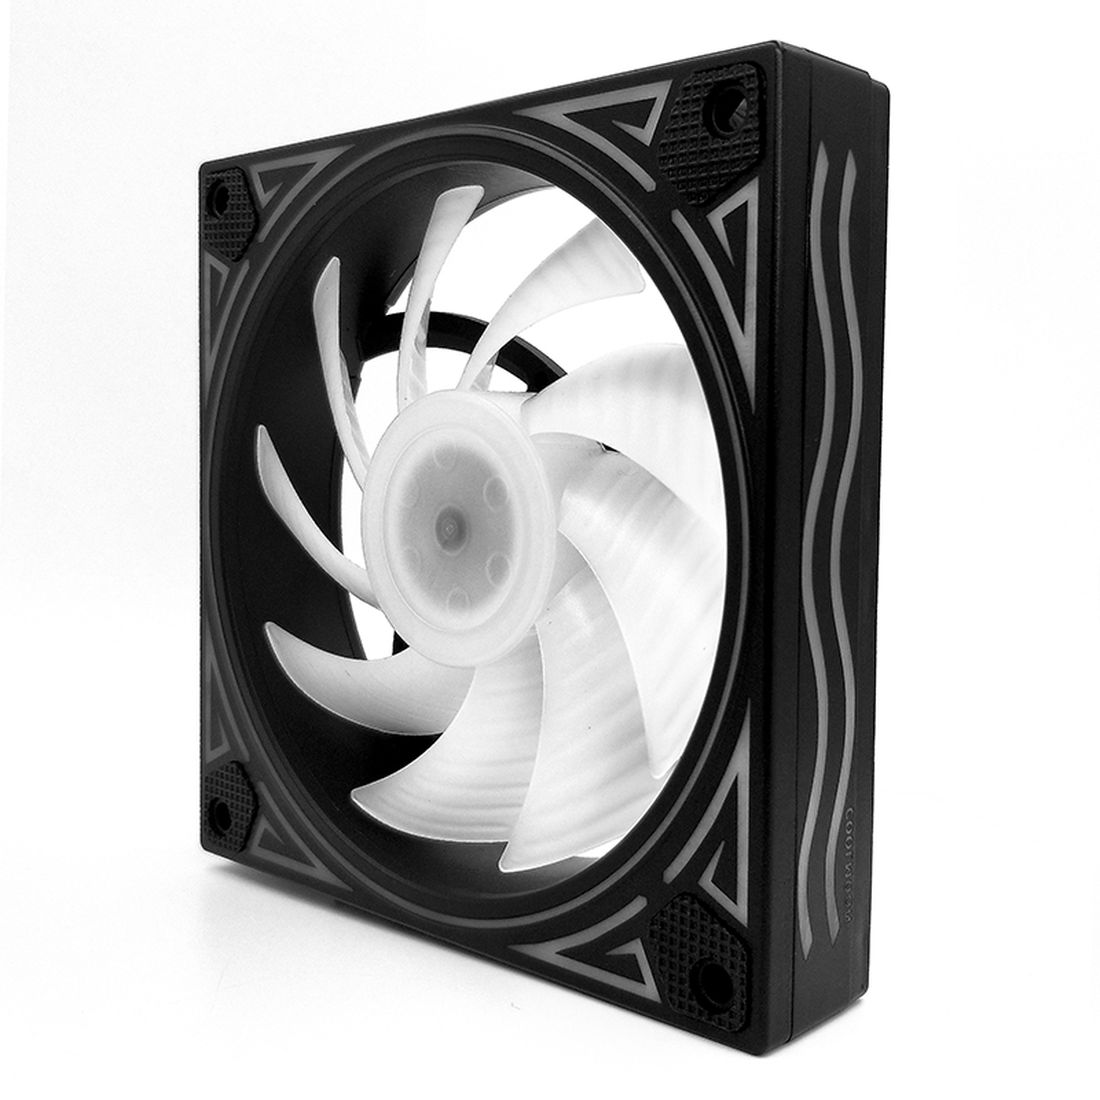 Coolmoon кулеры. Coolmoon RGB кулер. Coolmoon 120mm 6xcooling Fan RGB. Coolmoon v2 Cooper. Coolmoon stable led Fan.